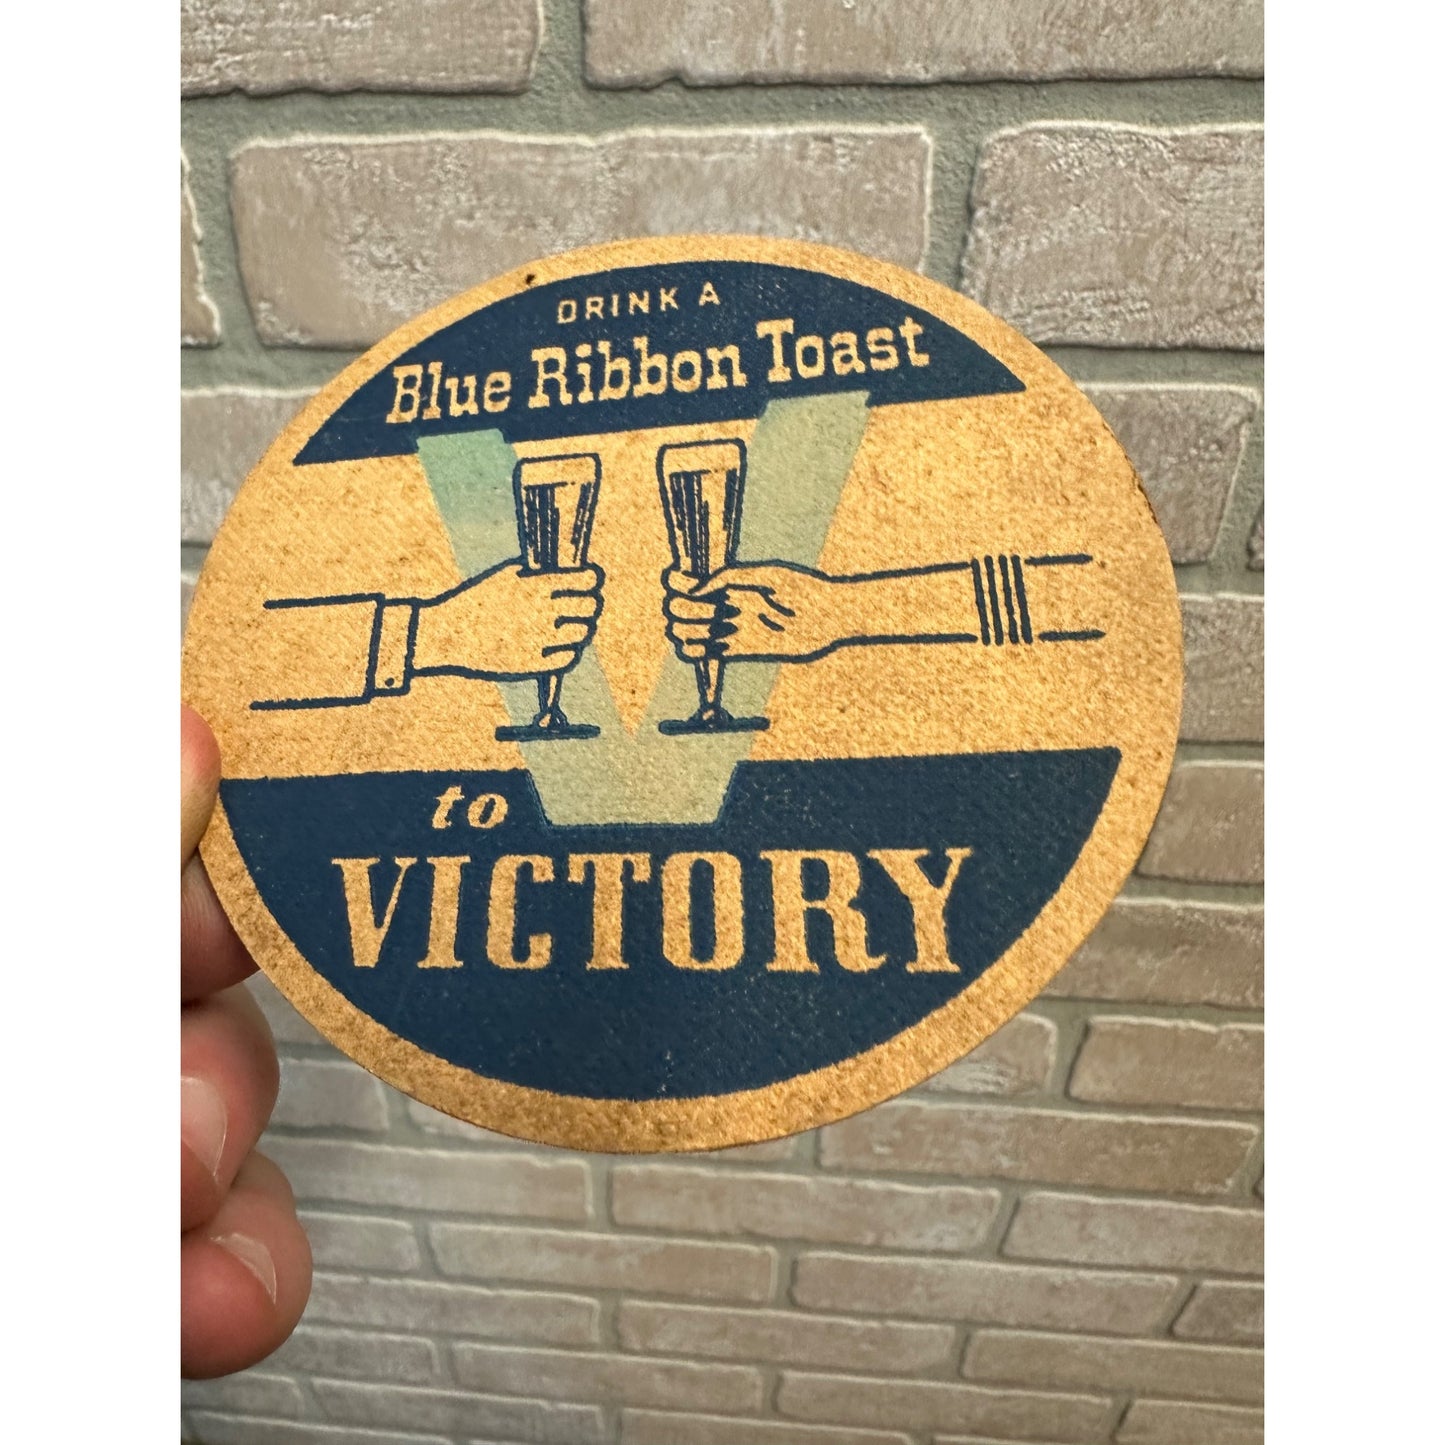 RARE PABST "DRINK A BLUE RIBBON TOAST TO VICTORY" WWII BEER COASTER